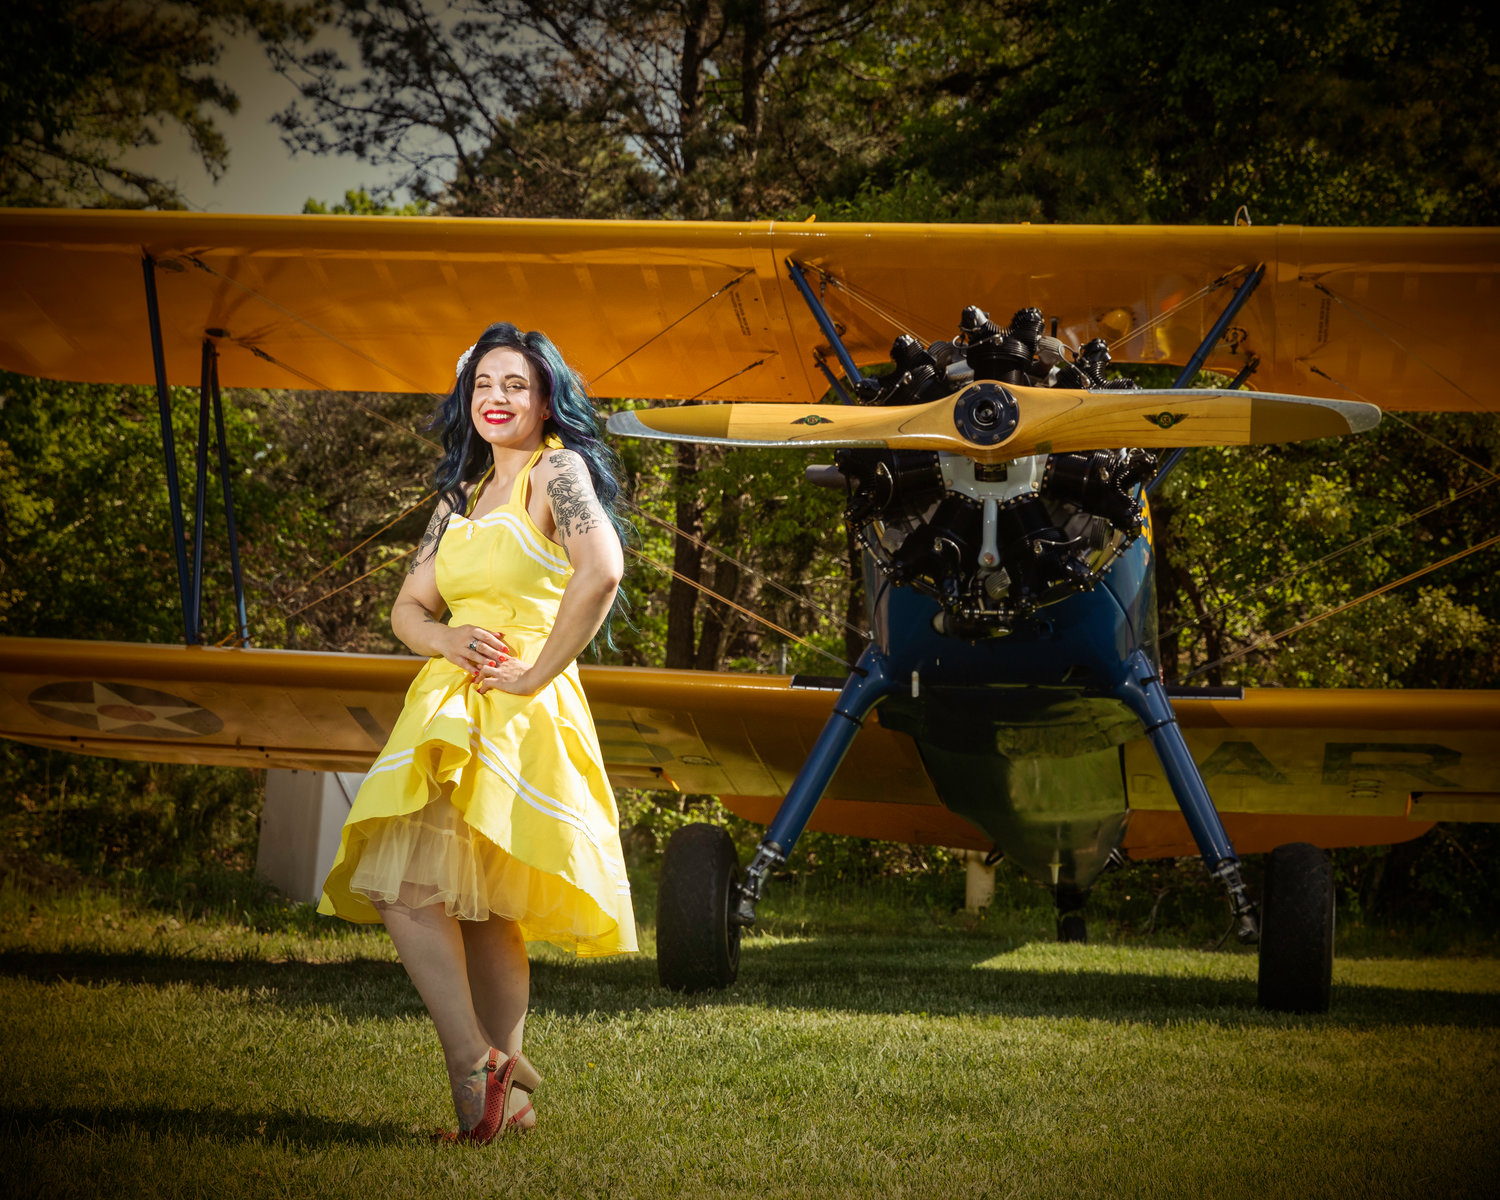 A fixture of the ubiquitous pinup fandom on Long Island, Rosie Casaceli poses with a 1940s airplane to set off her vintage wardrobe piece